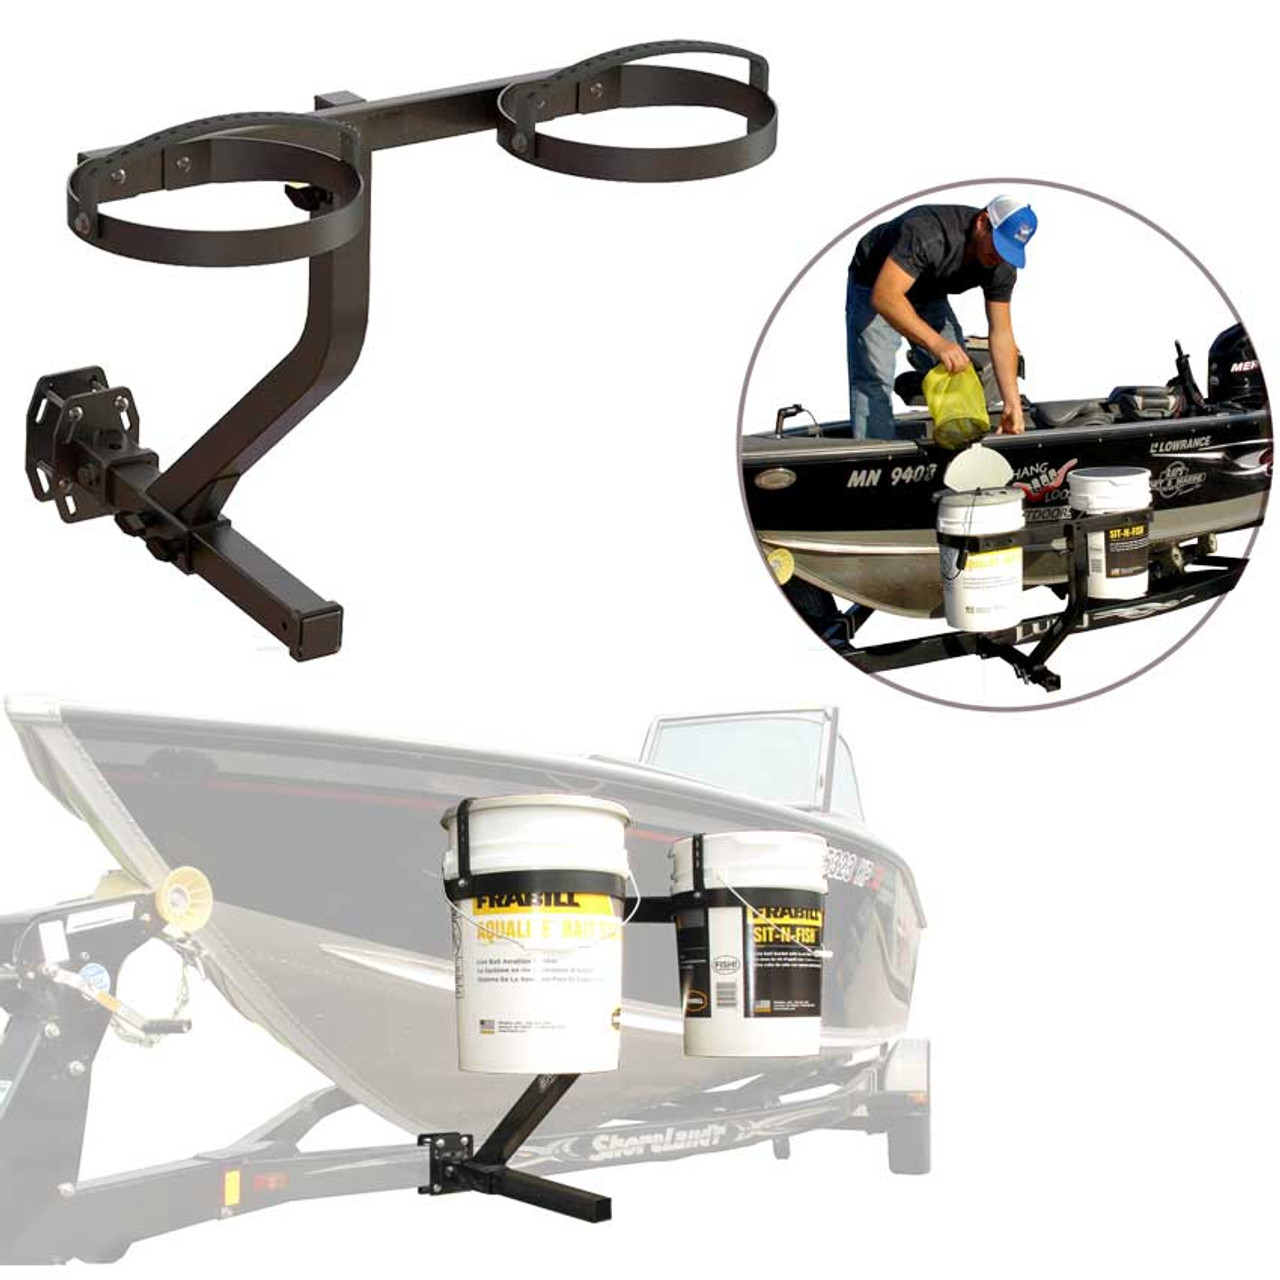 https://cdn11.bigcommerce.com/s-94ve5l/images/stencil/1280x1280/products/2312/3741/Boat-trailer-bucket-carrier-side-mounted-5-gallon-pail-holder-__92074.1611266468.jpg?c=2